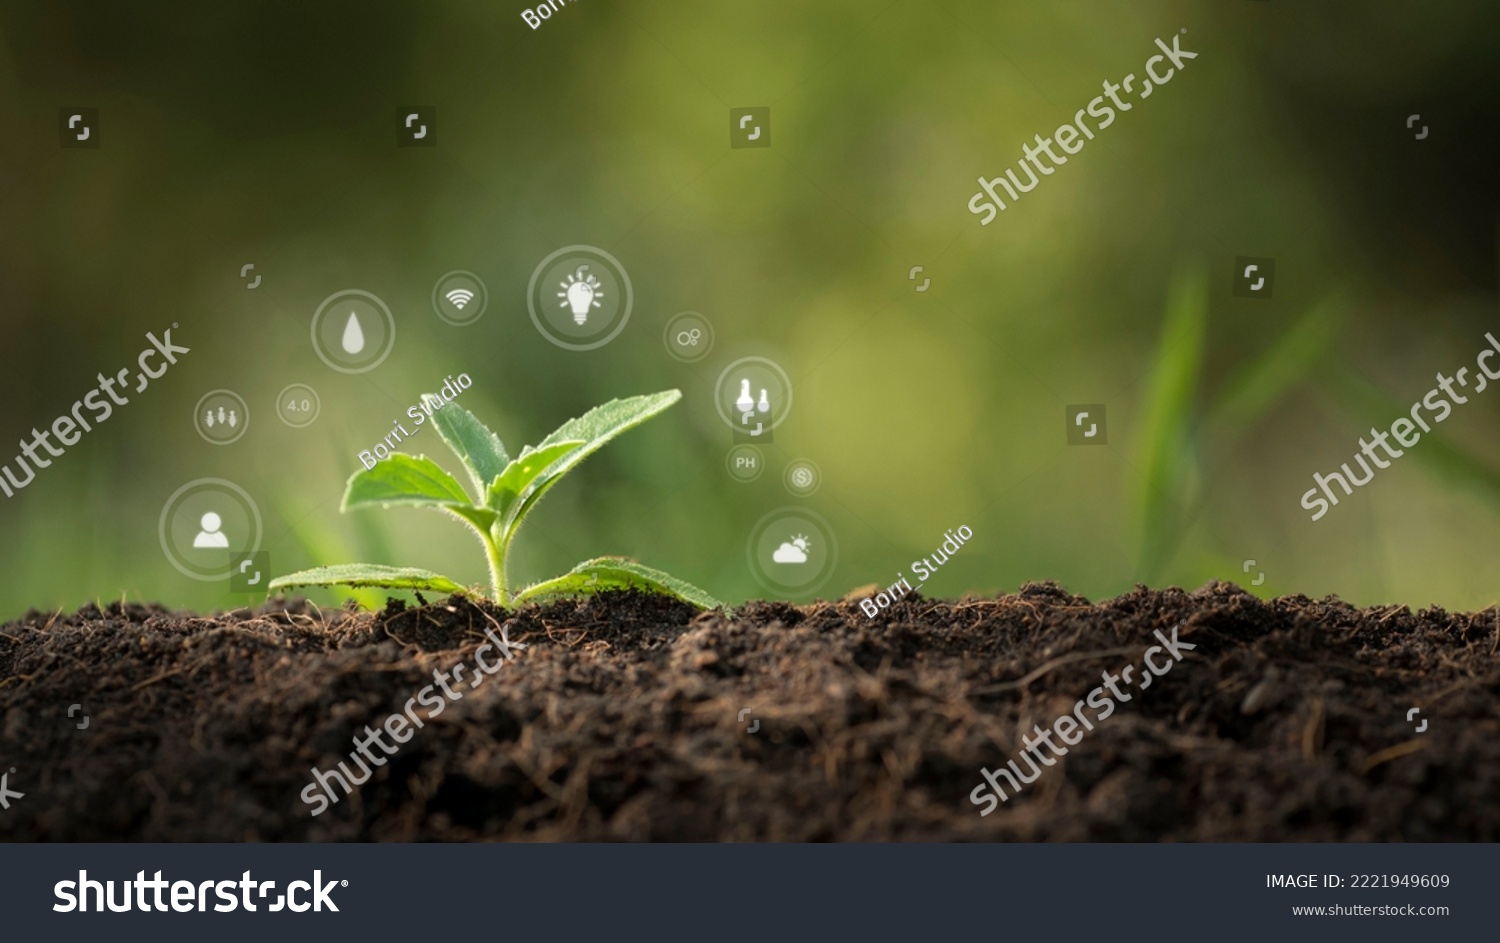 agricultural growth concept It has both the benefits of soil and plants. Including the use of artificial intelligence agriculture technology in 5G Industry 4.0 technology that needs to be improved. ai #2221949609